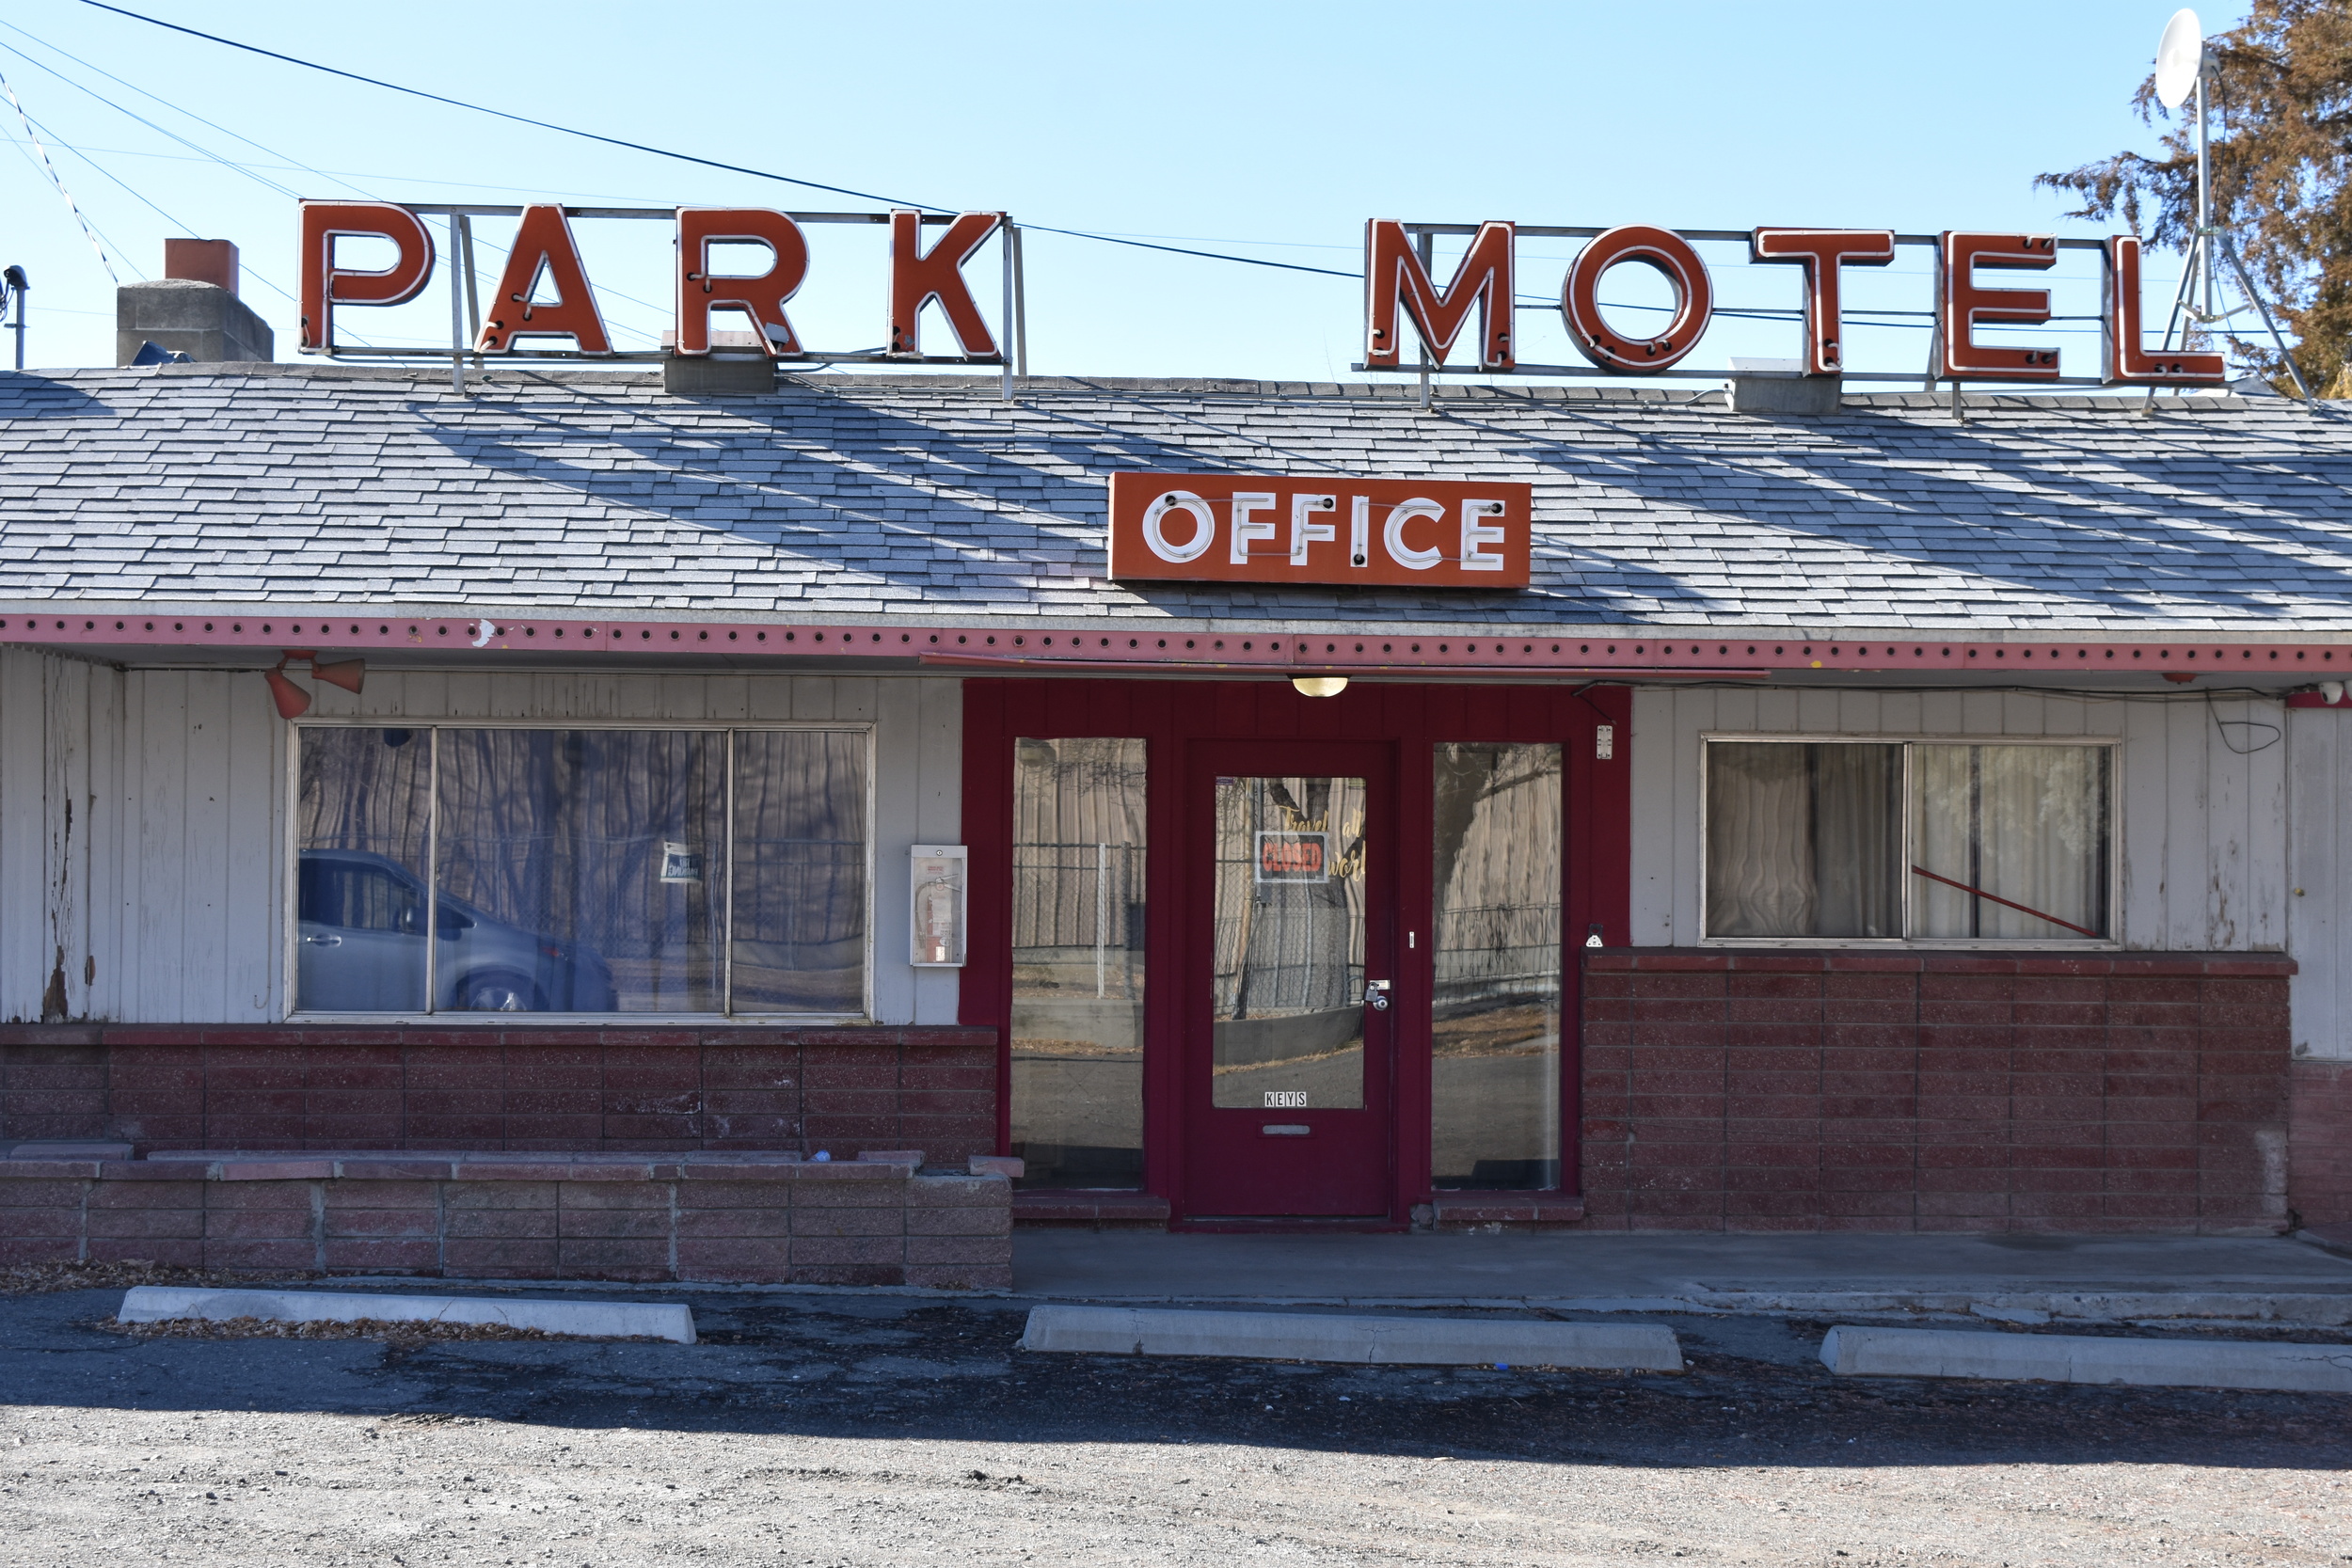 Park Motel roof mounted sign, Winnemucca, Nevada